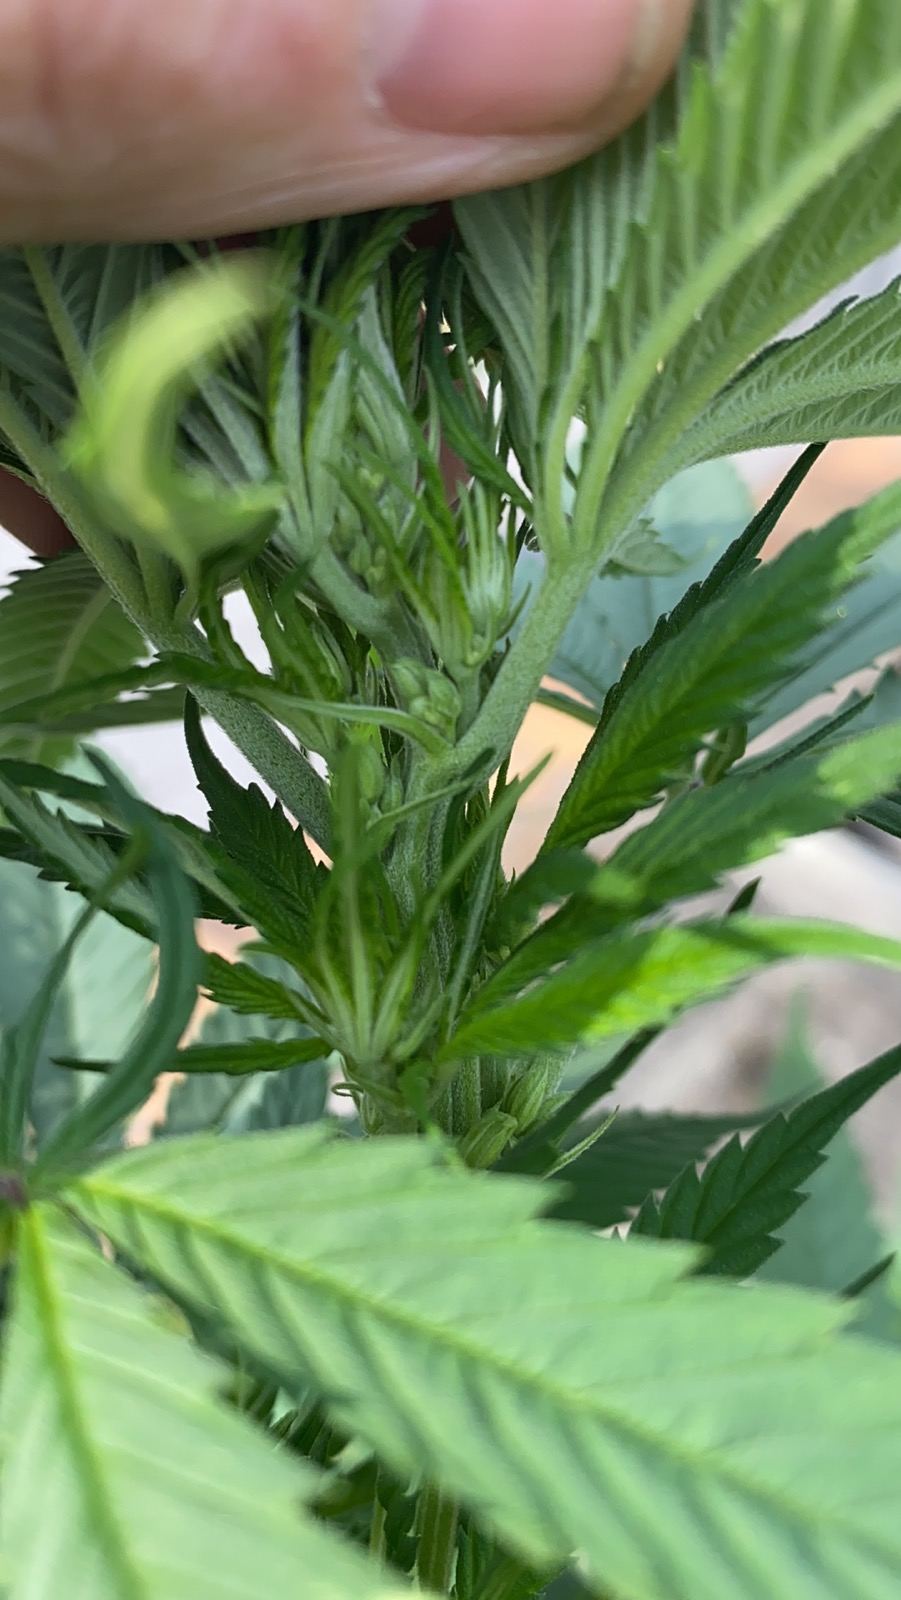 Has my girl turned to a boy new grower